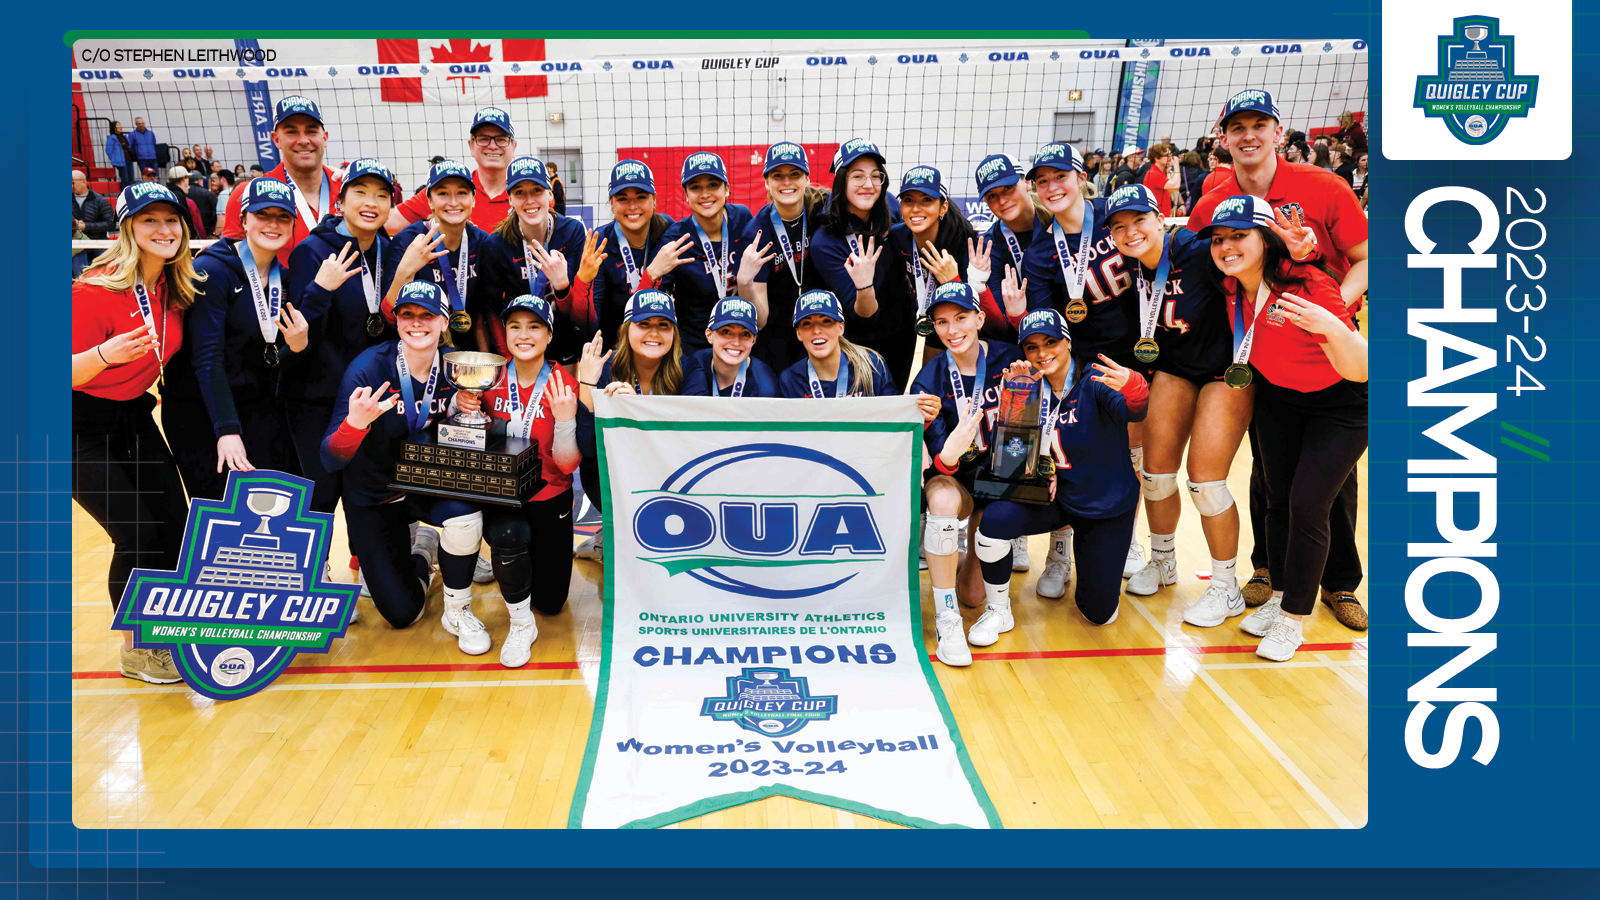 Predominantly blue graphic covered mostly by 2023-24 OUA Women's Volleyball Championship banner photo, with the corresponding championship logo and white text reading '2023-24 Champions' on the right side